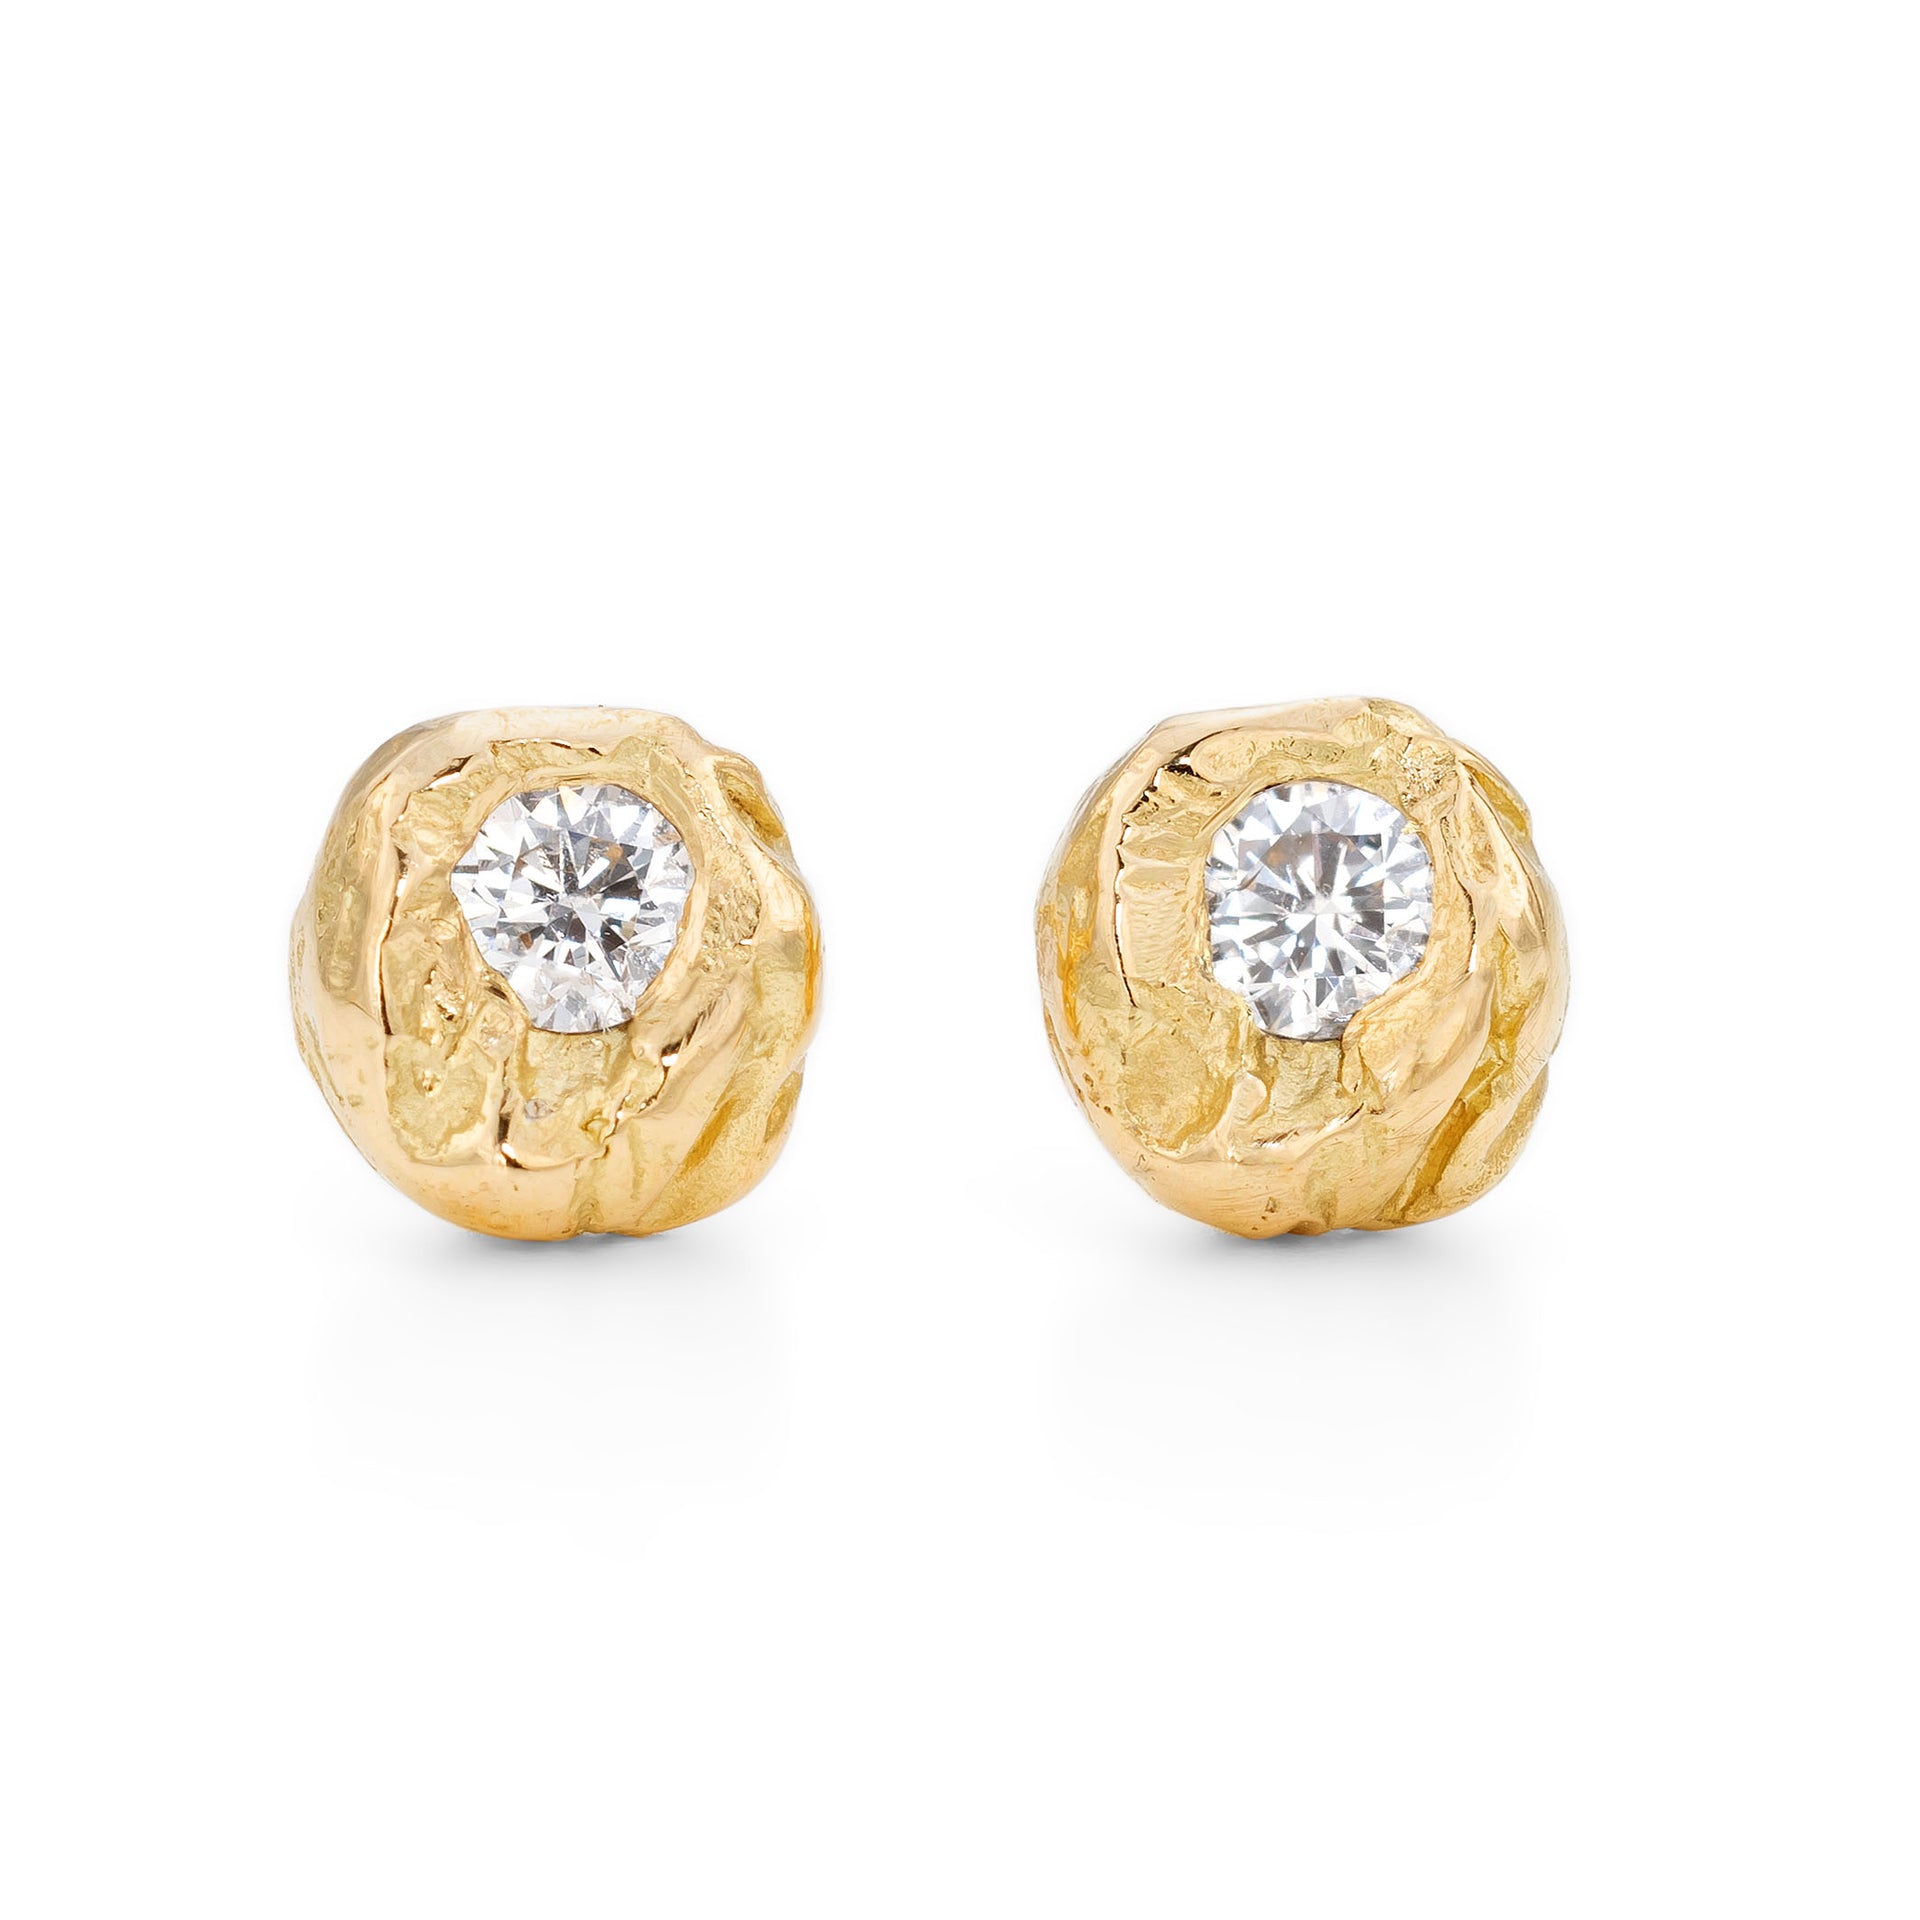 18ct recycled yellow gold and diamond stud earrings. Cast by hand in Cornwall by Emily Nixon Jewellery.